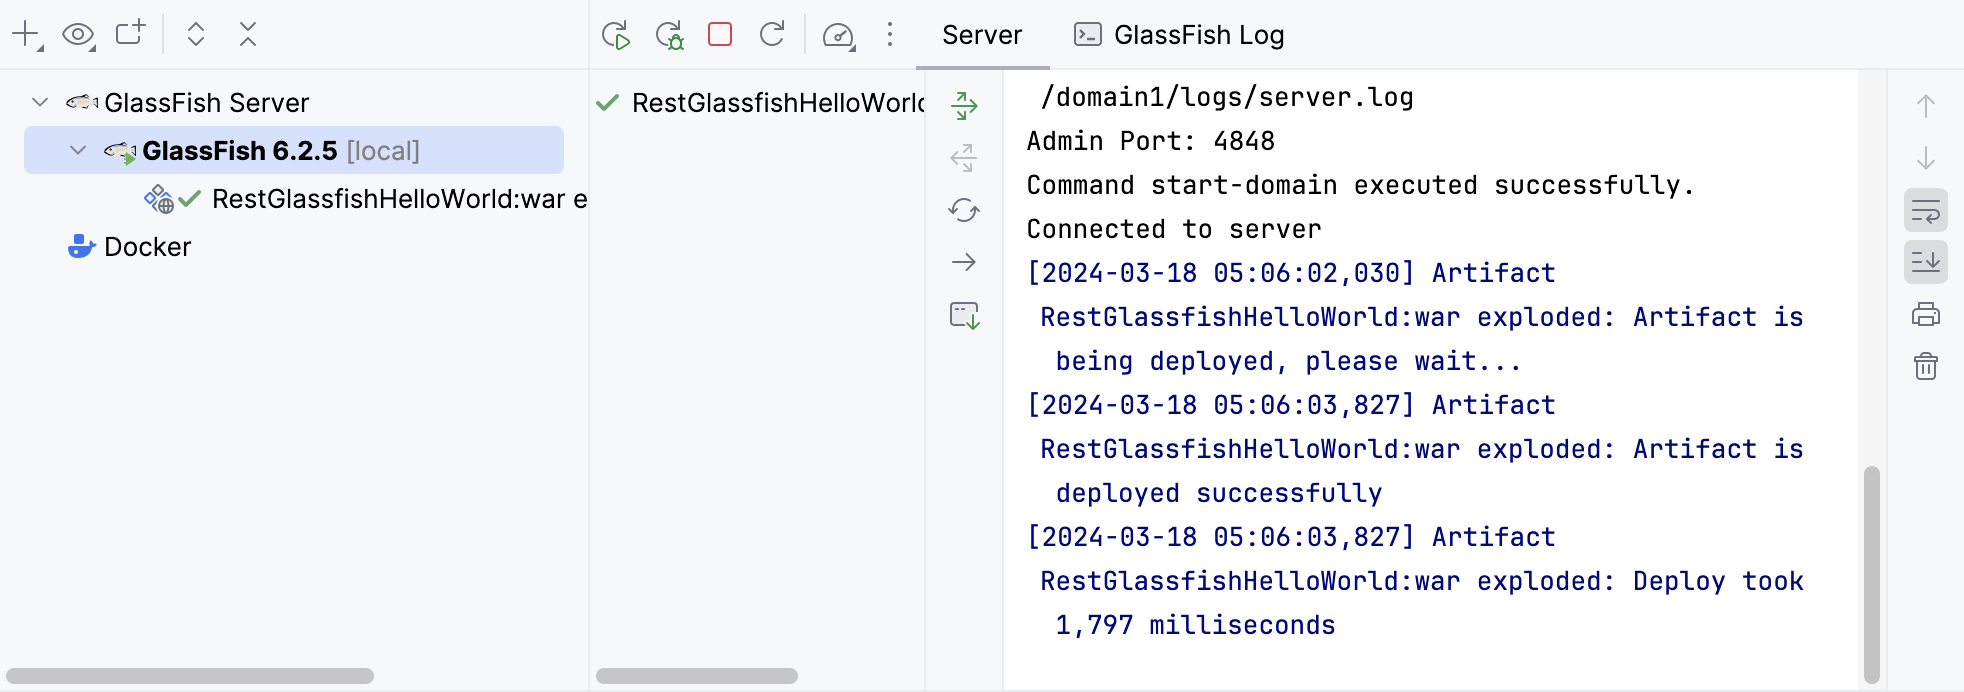 Started GlassFish server and deployed application in the Services tool window